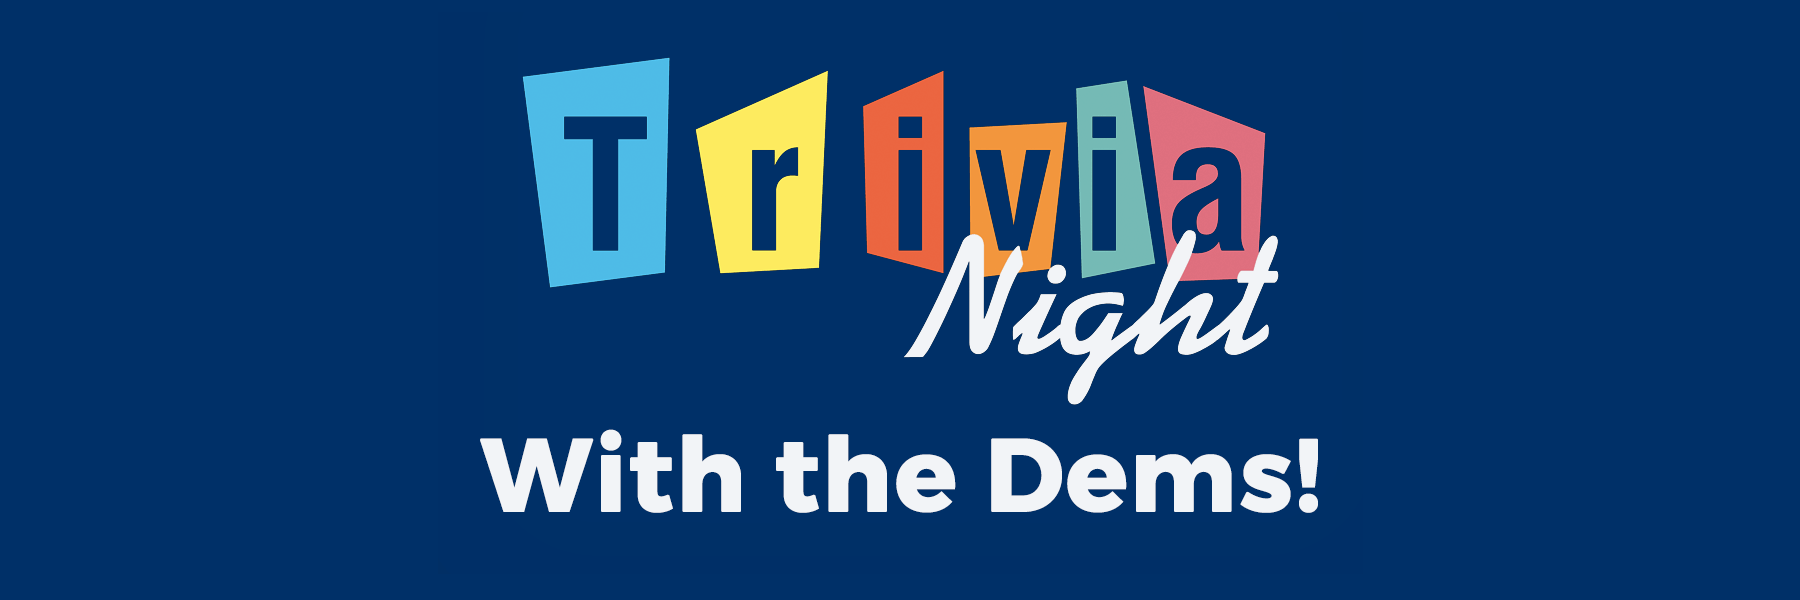 Trivia Night with the Democrats of Indian River County